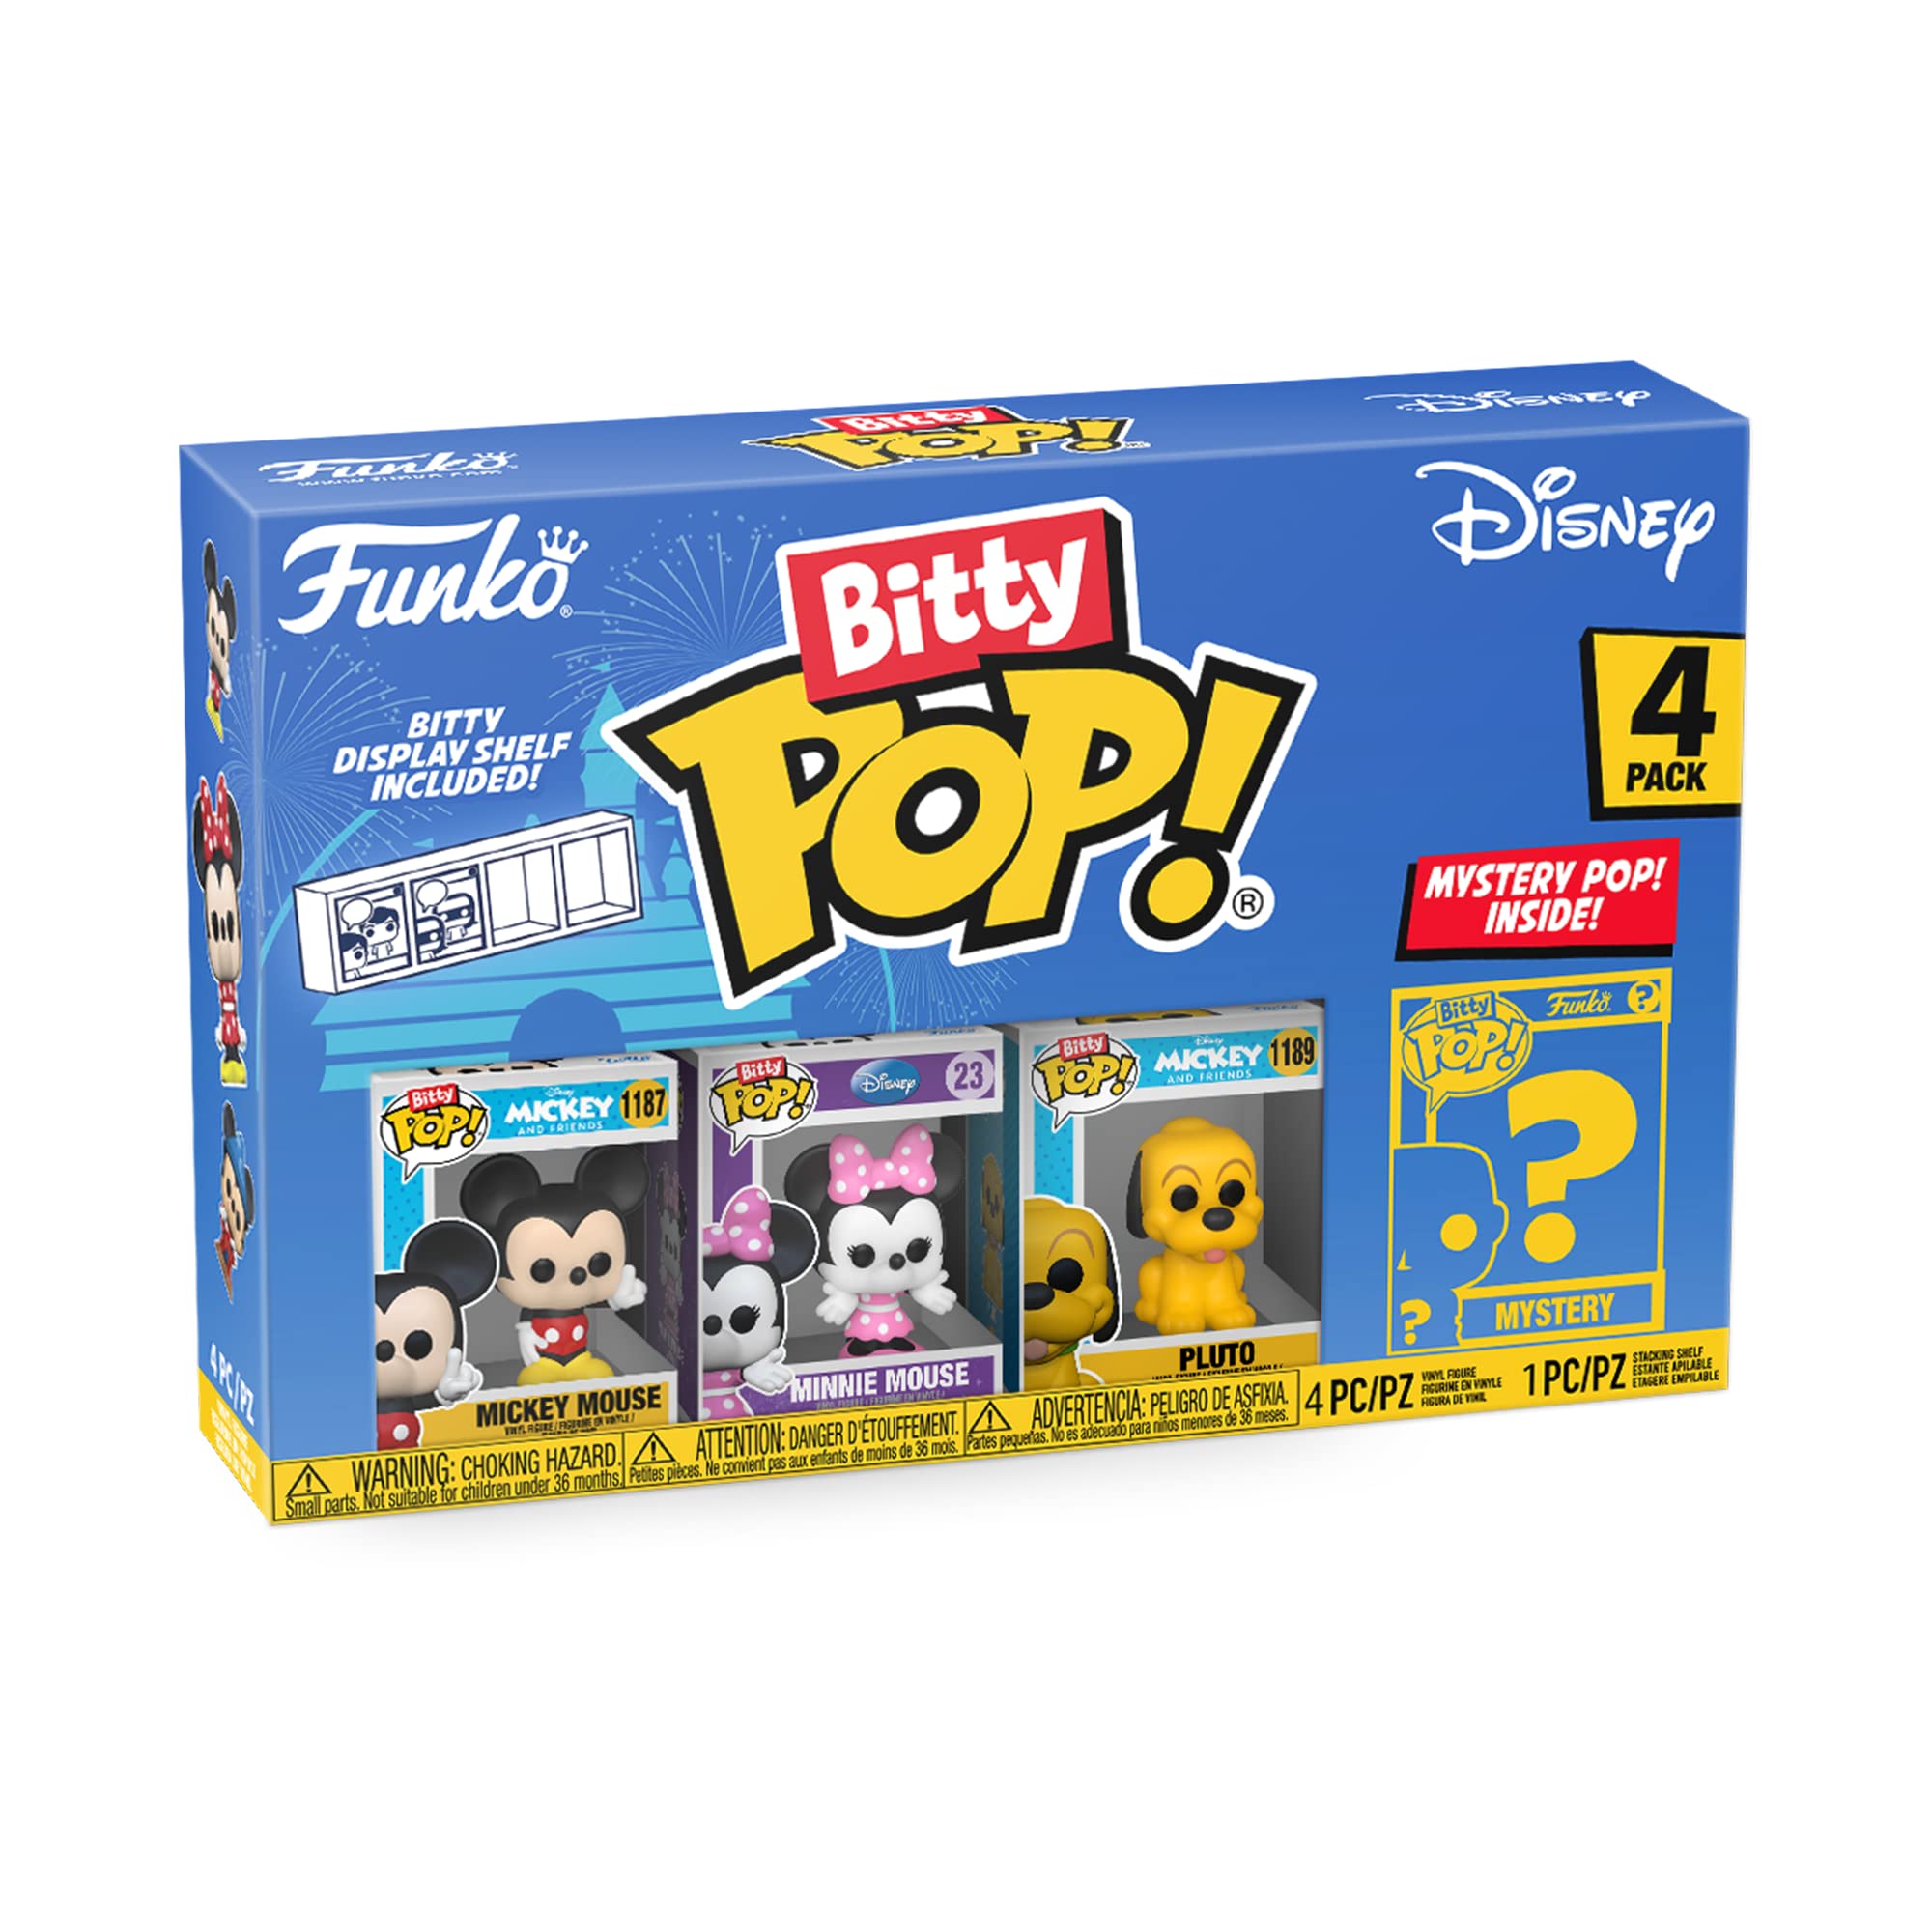 Funko Bitty Pop! Disney Mini Collectible Toys - Mickey Mouse, Minnie Mouse, Pluto & Mystery Chase Figure (Styles May Vary) 4-Pac